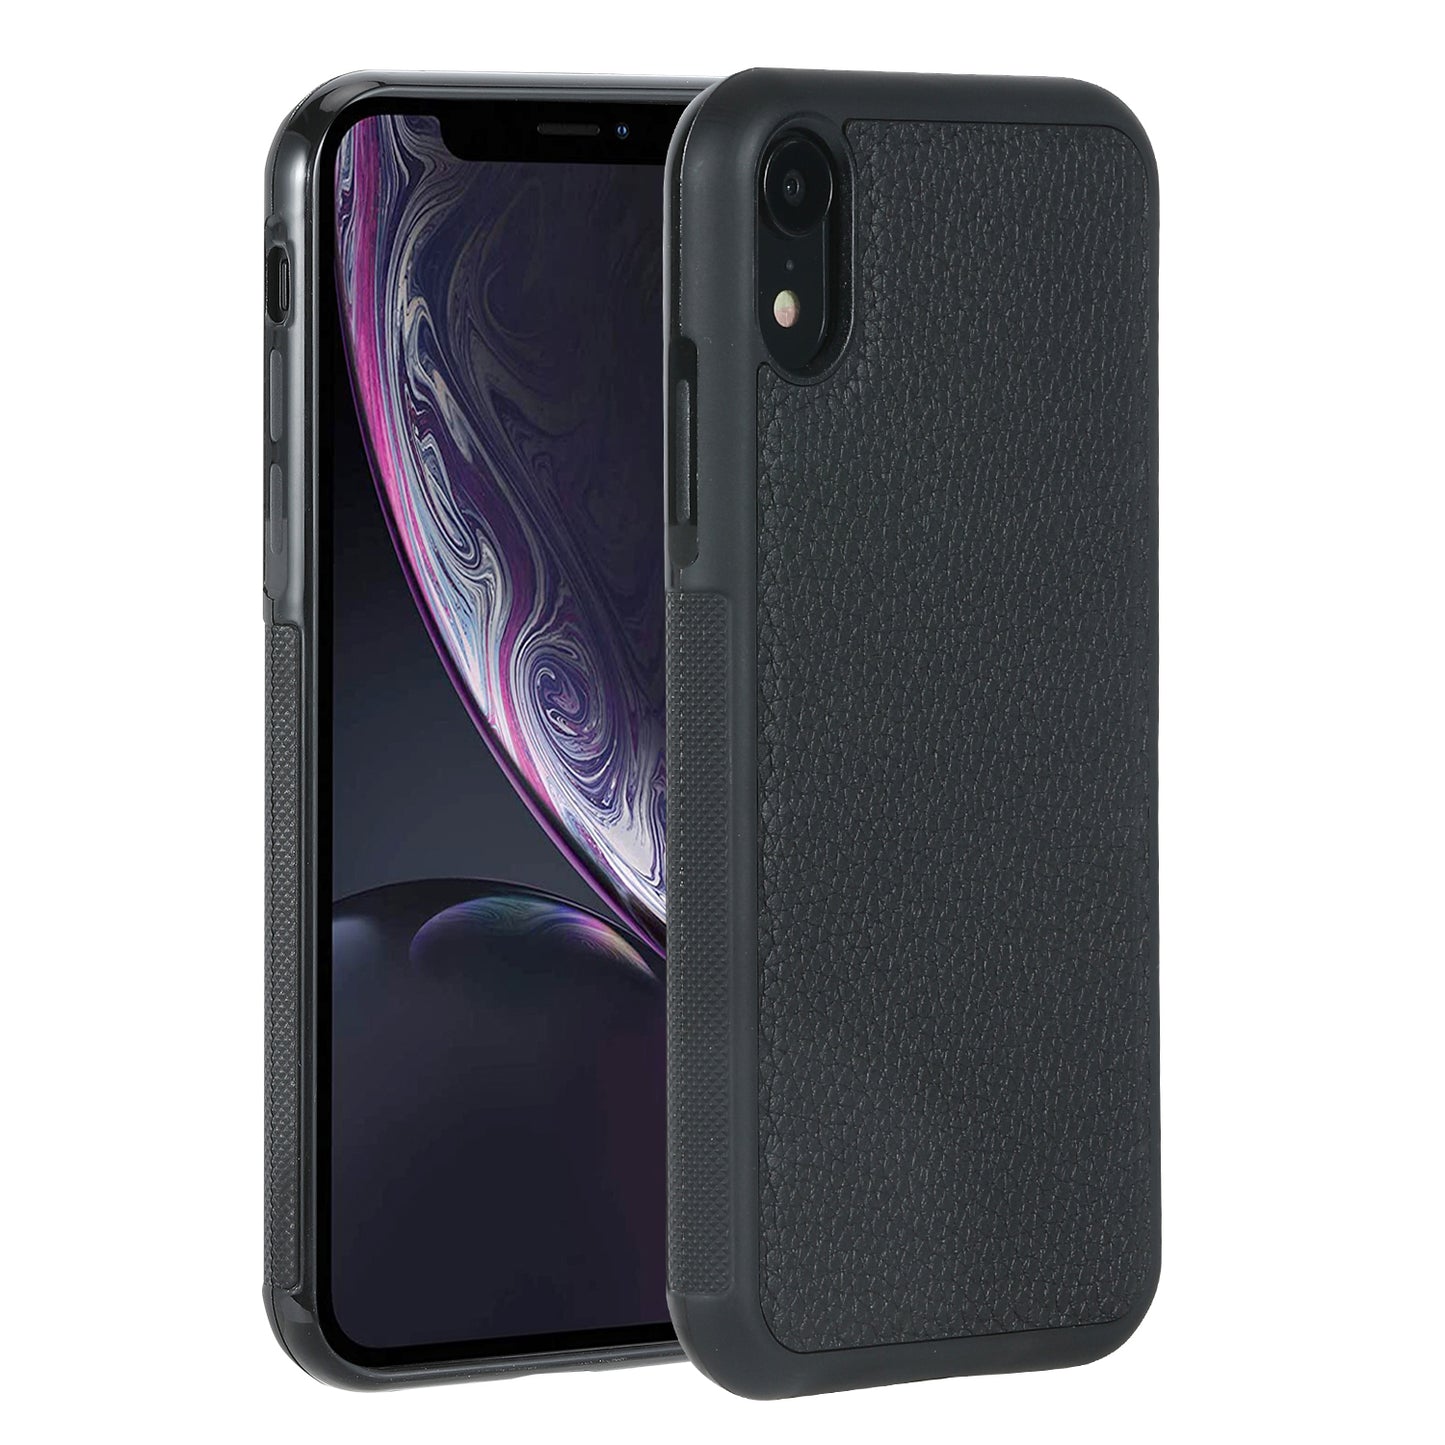 Molzar Grip Series iPhone XR with Real Forged Carbon Case